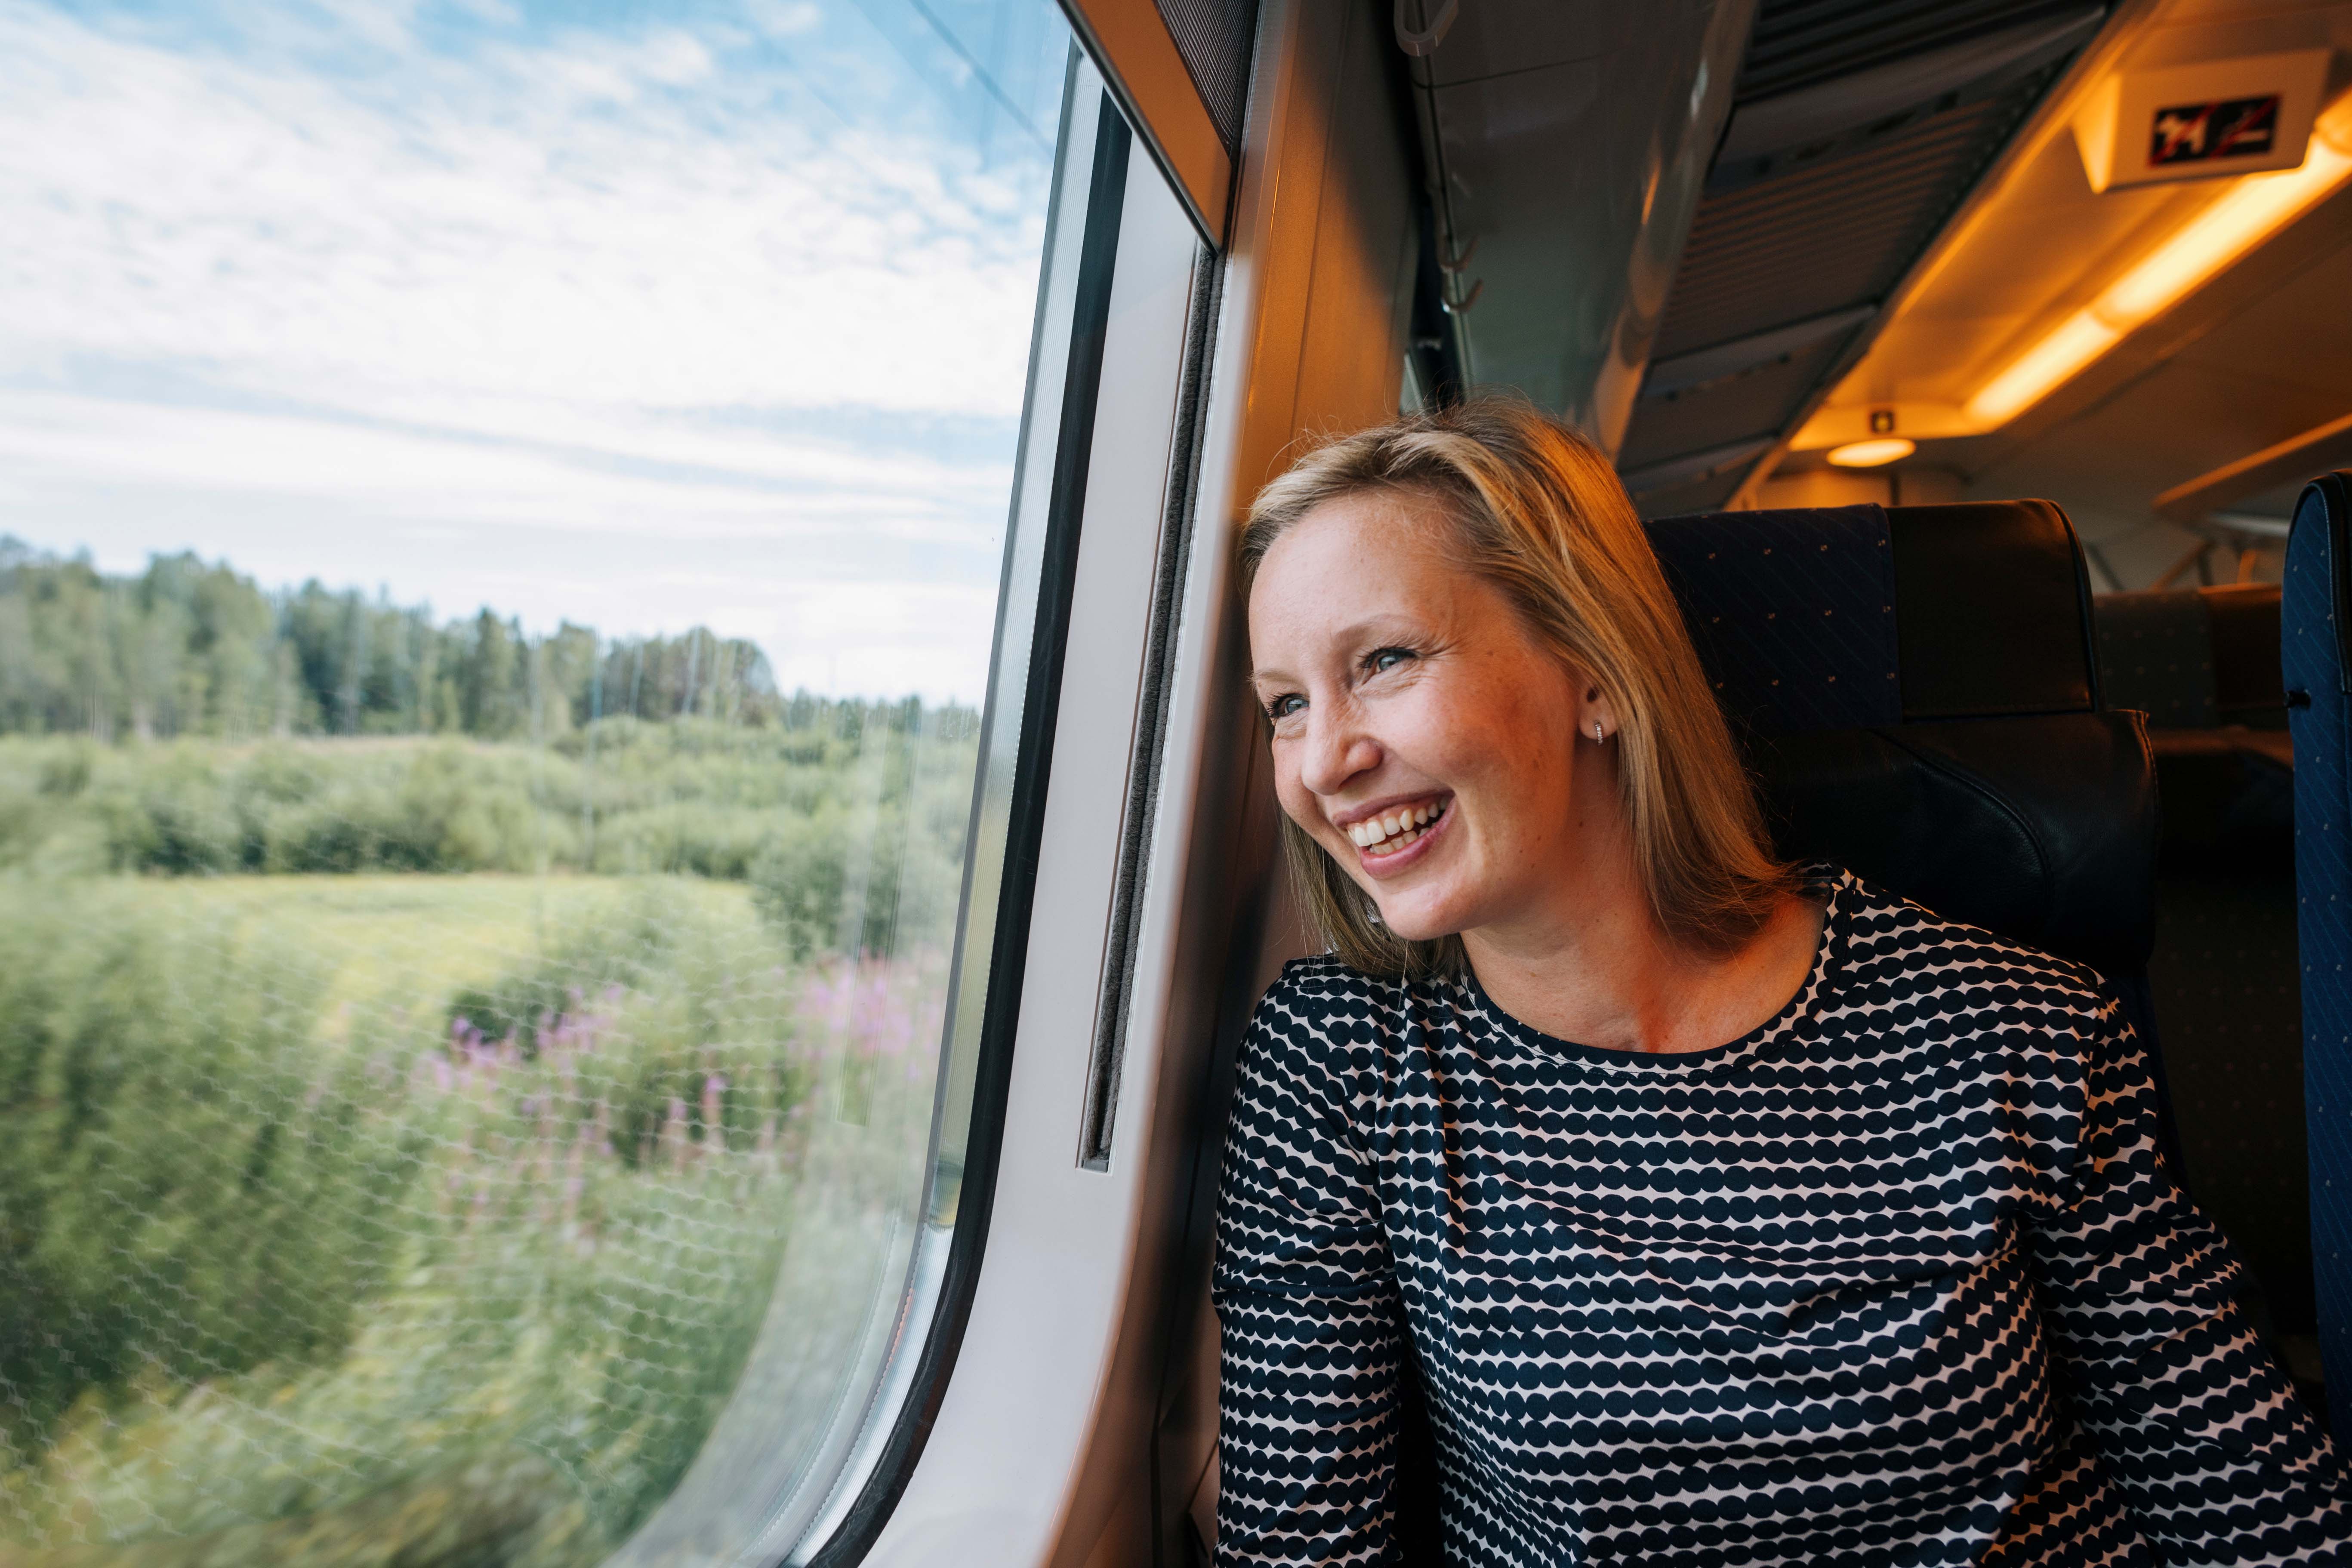 A happy traveller looking out of a train window at a green Finnish countryside.